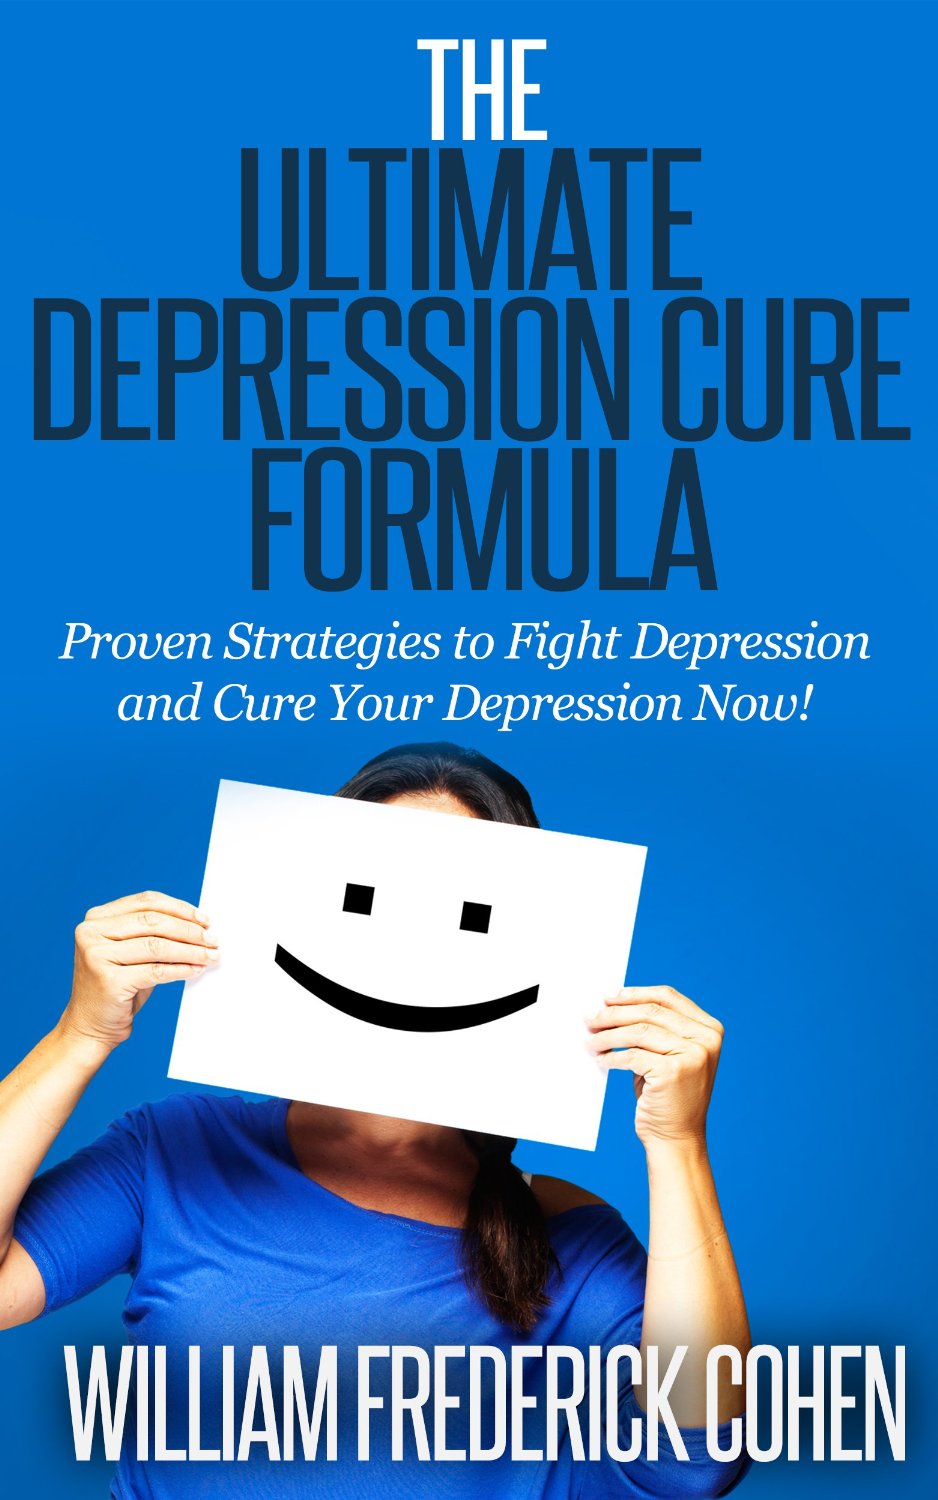 The Ultimate Depression Cure Formula: Proven Strategies to Fight Depression and Cure Your Depression Now! by William Frederick Cohen